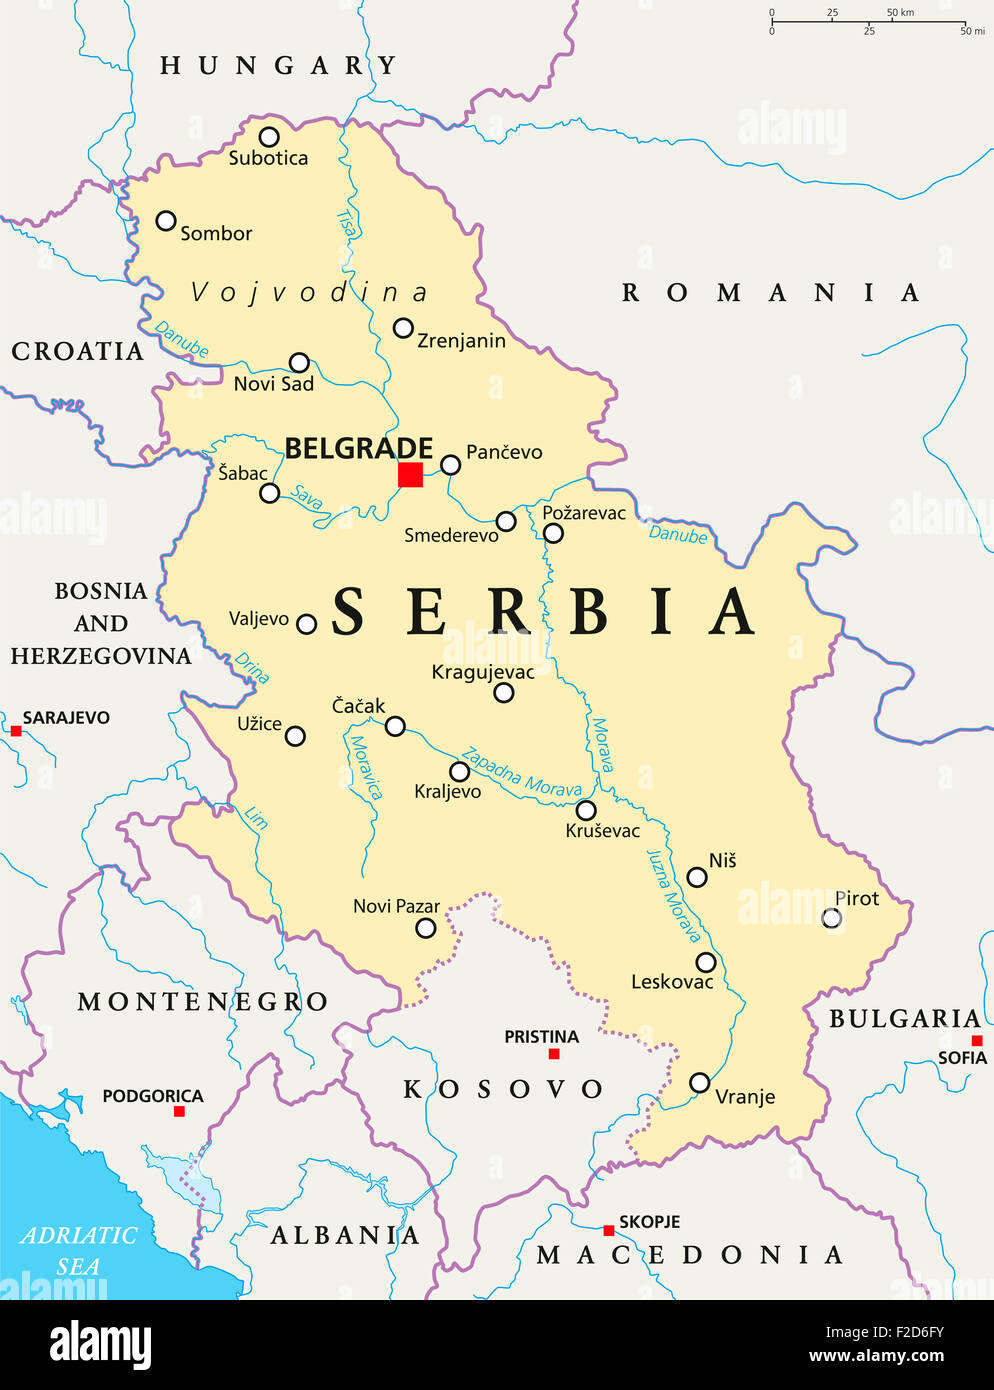 Serbia political map with capital Belgrade, national borders, important cities, rivers and lakes. English labeling and scaling. Stock Photo